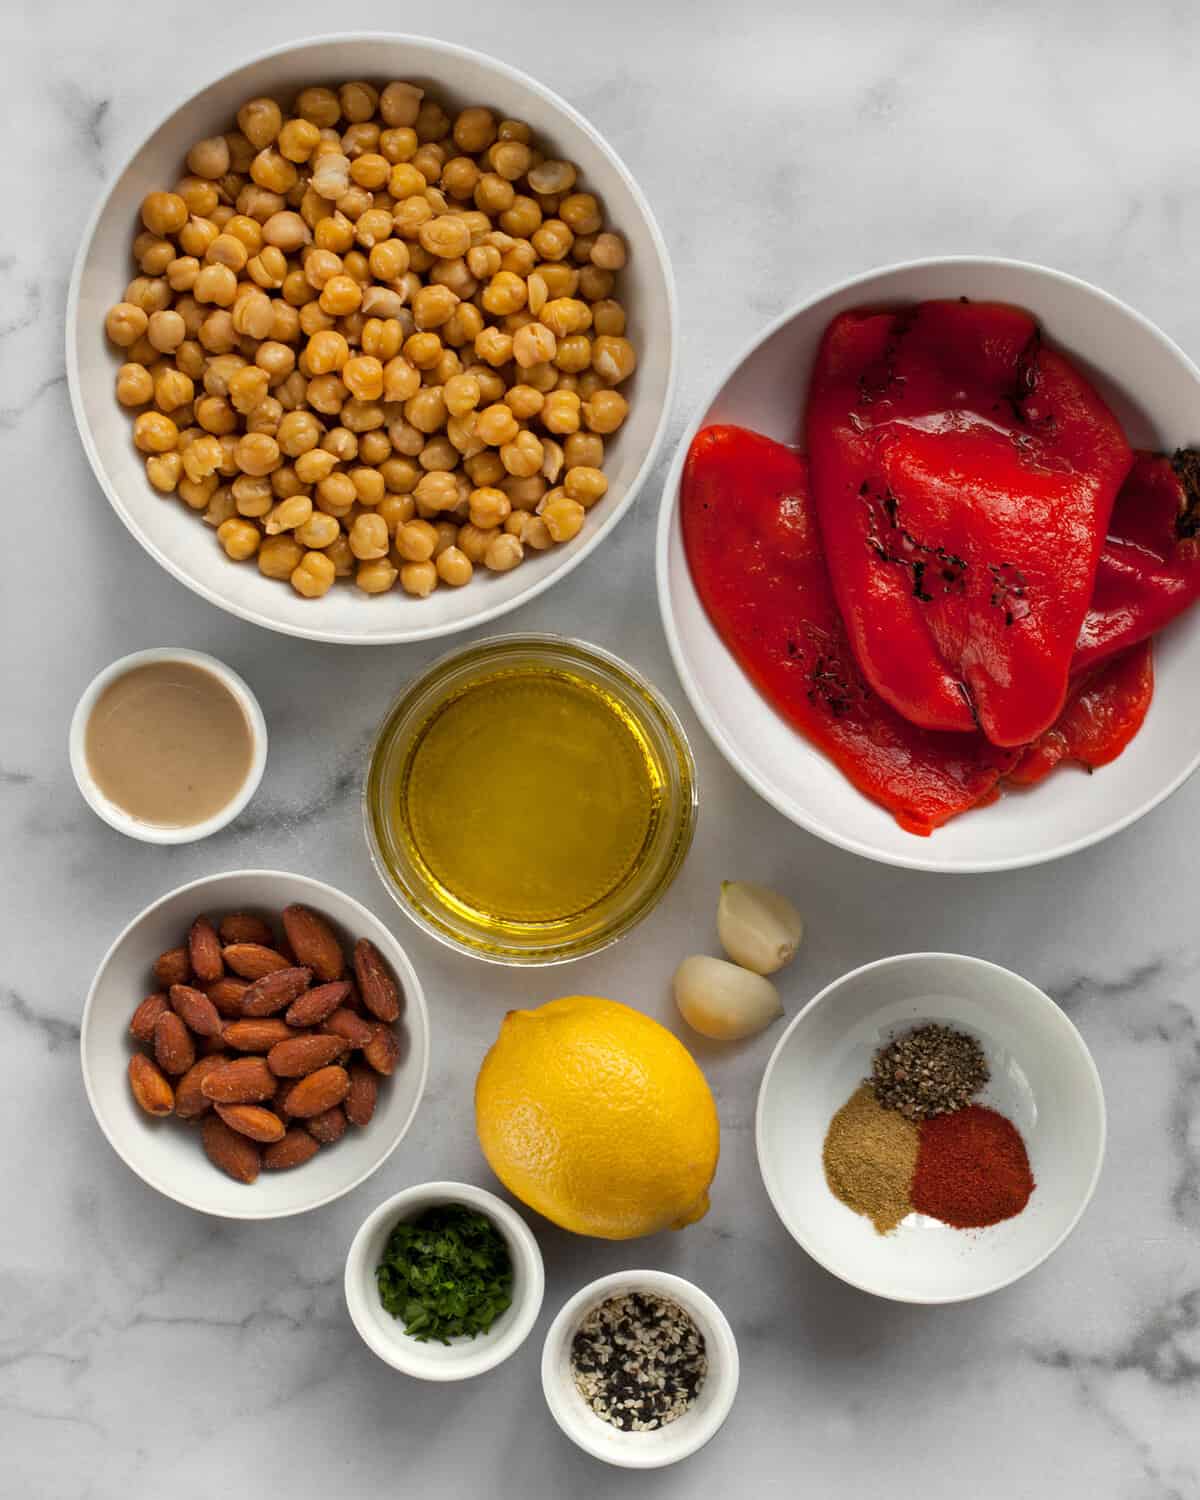 Ingredients including roasted red peppers, chickpeas, smoked almonds, lemon, tahini, olive oil and spices.